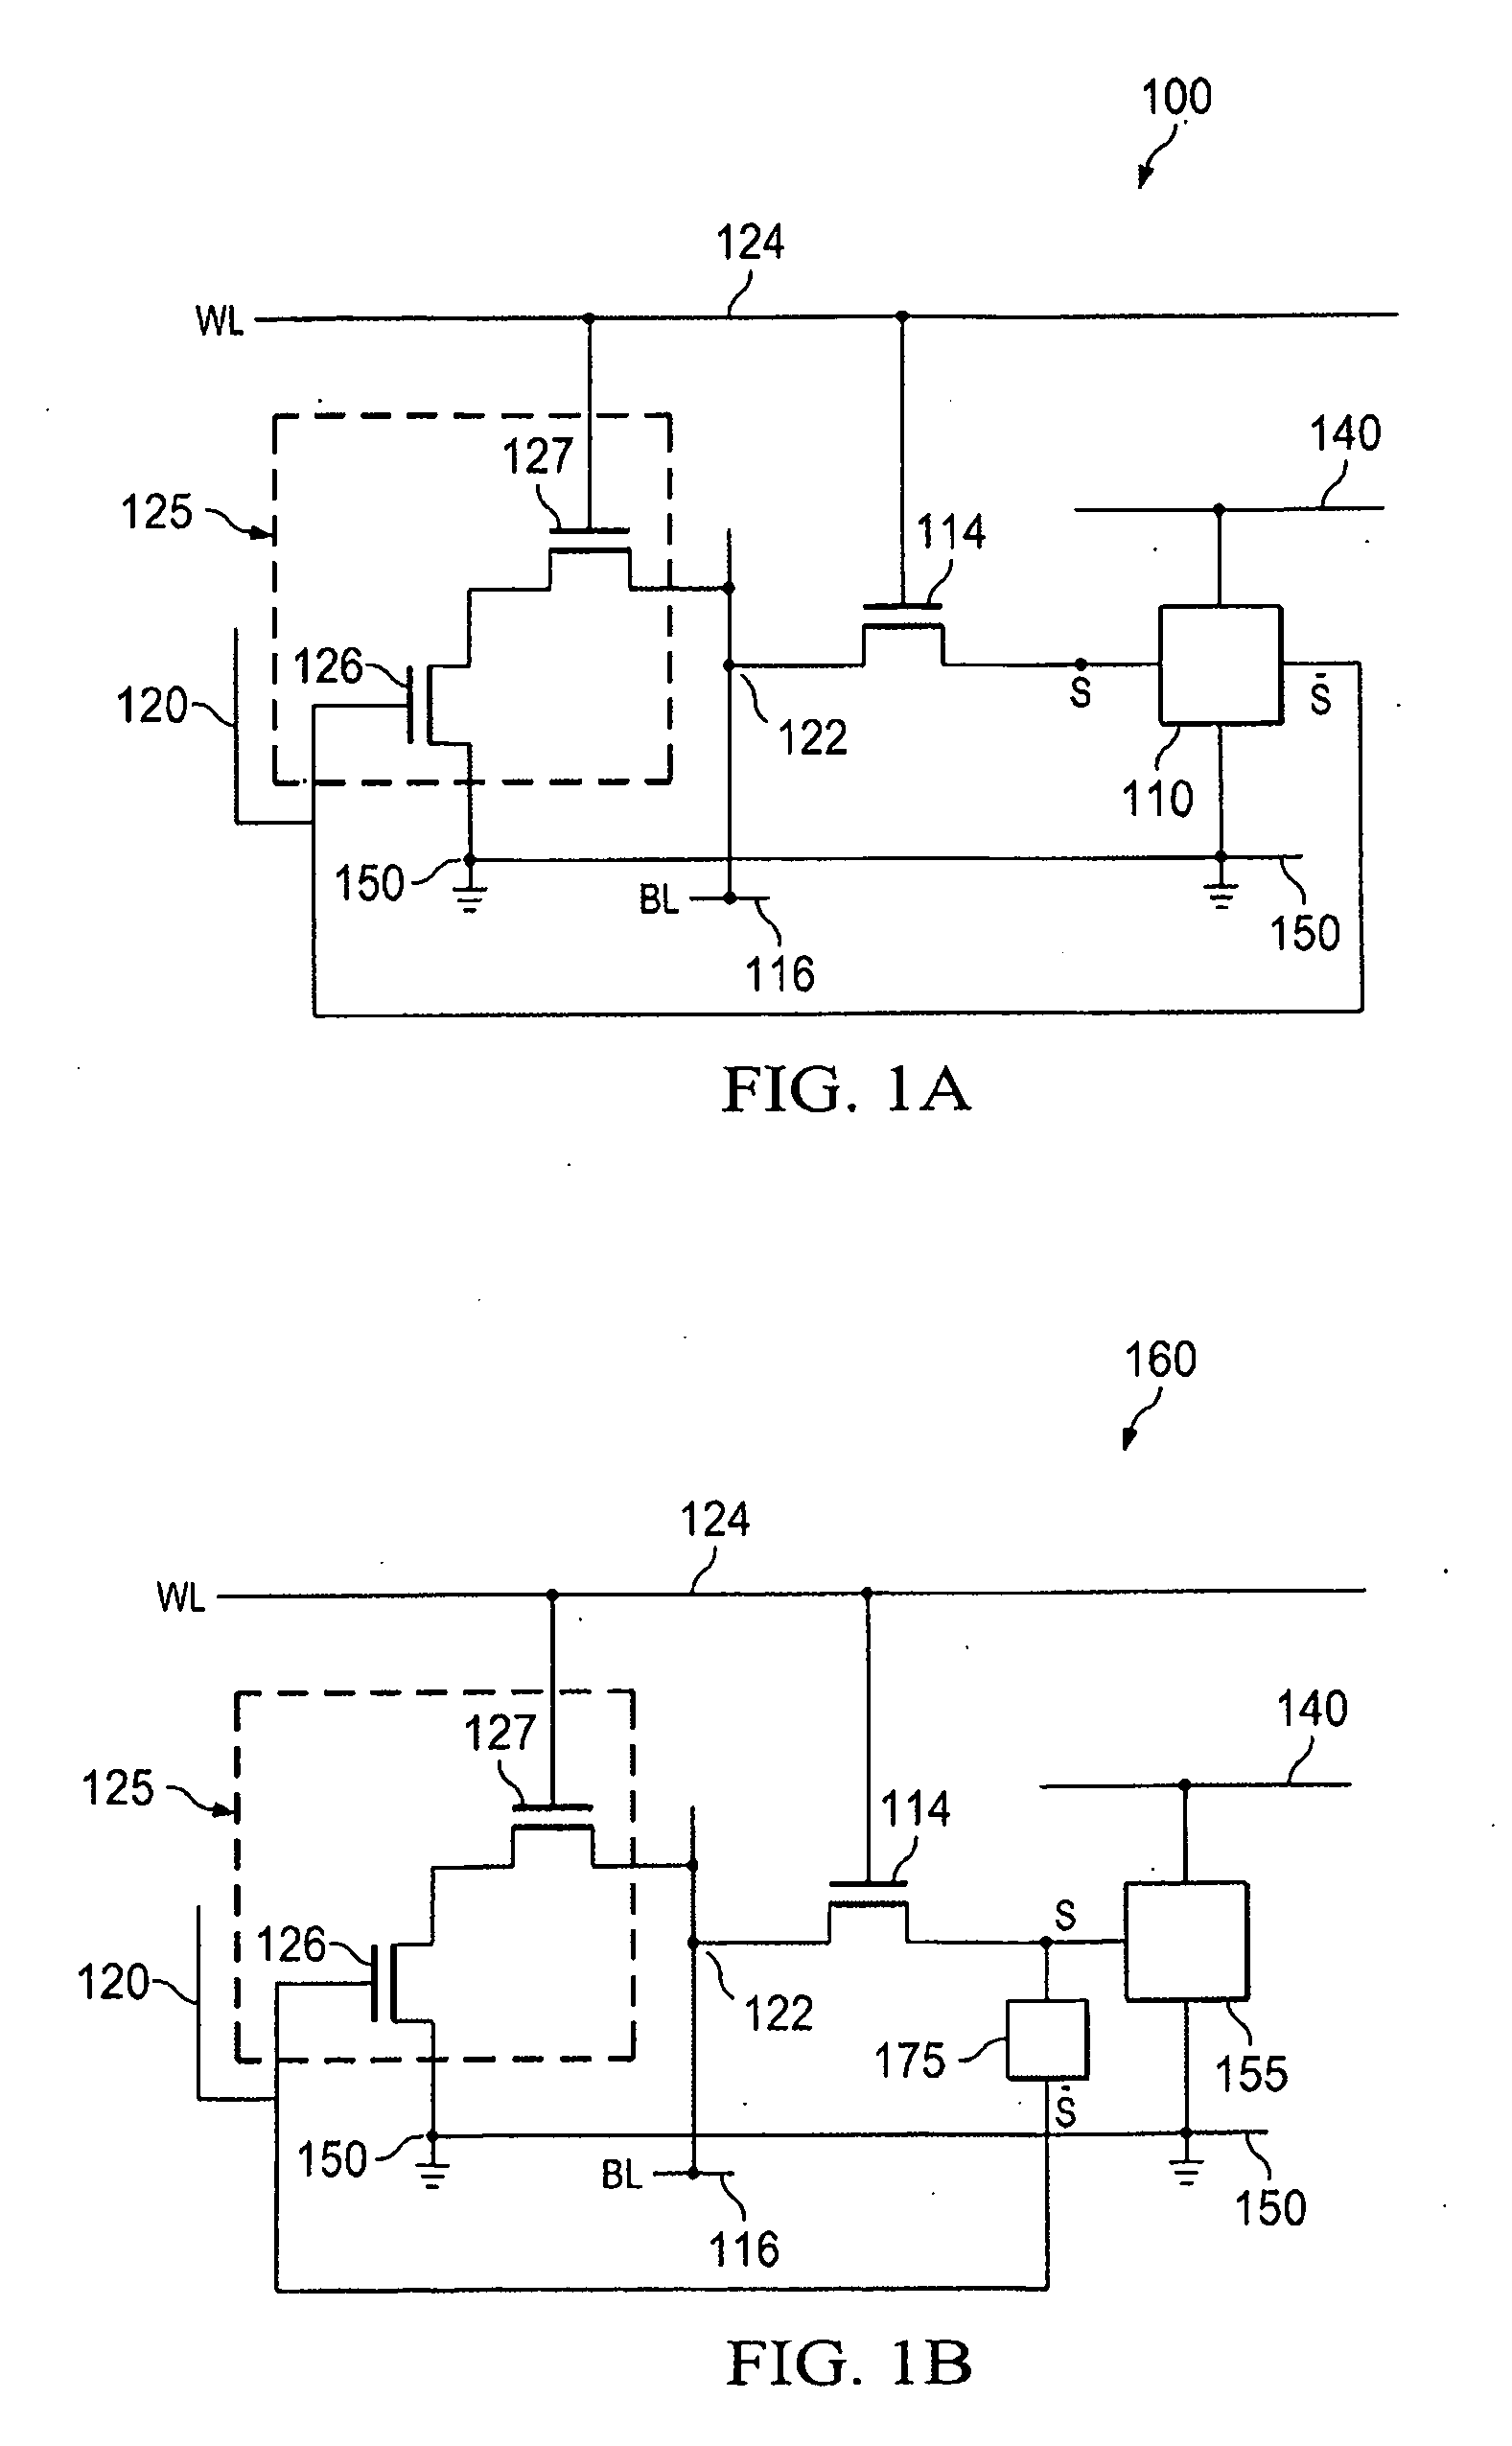 Storage cell having buffer circuit for driving the bitline